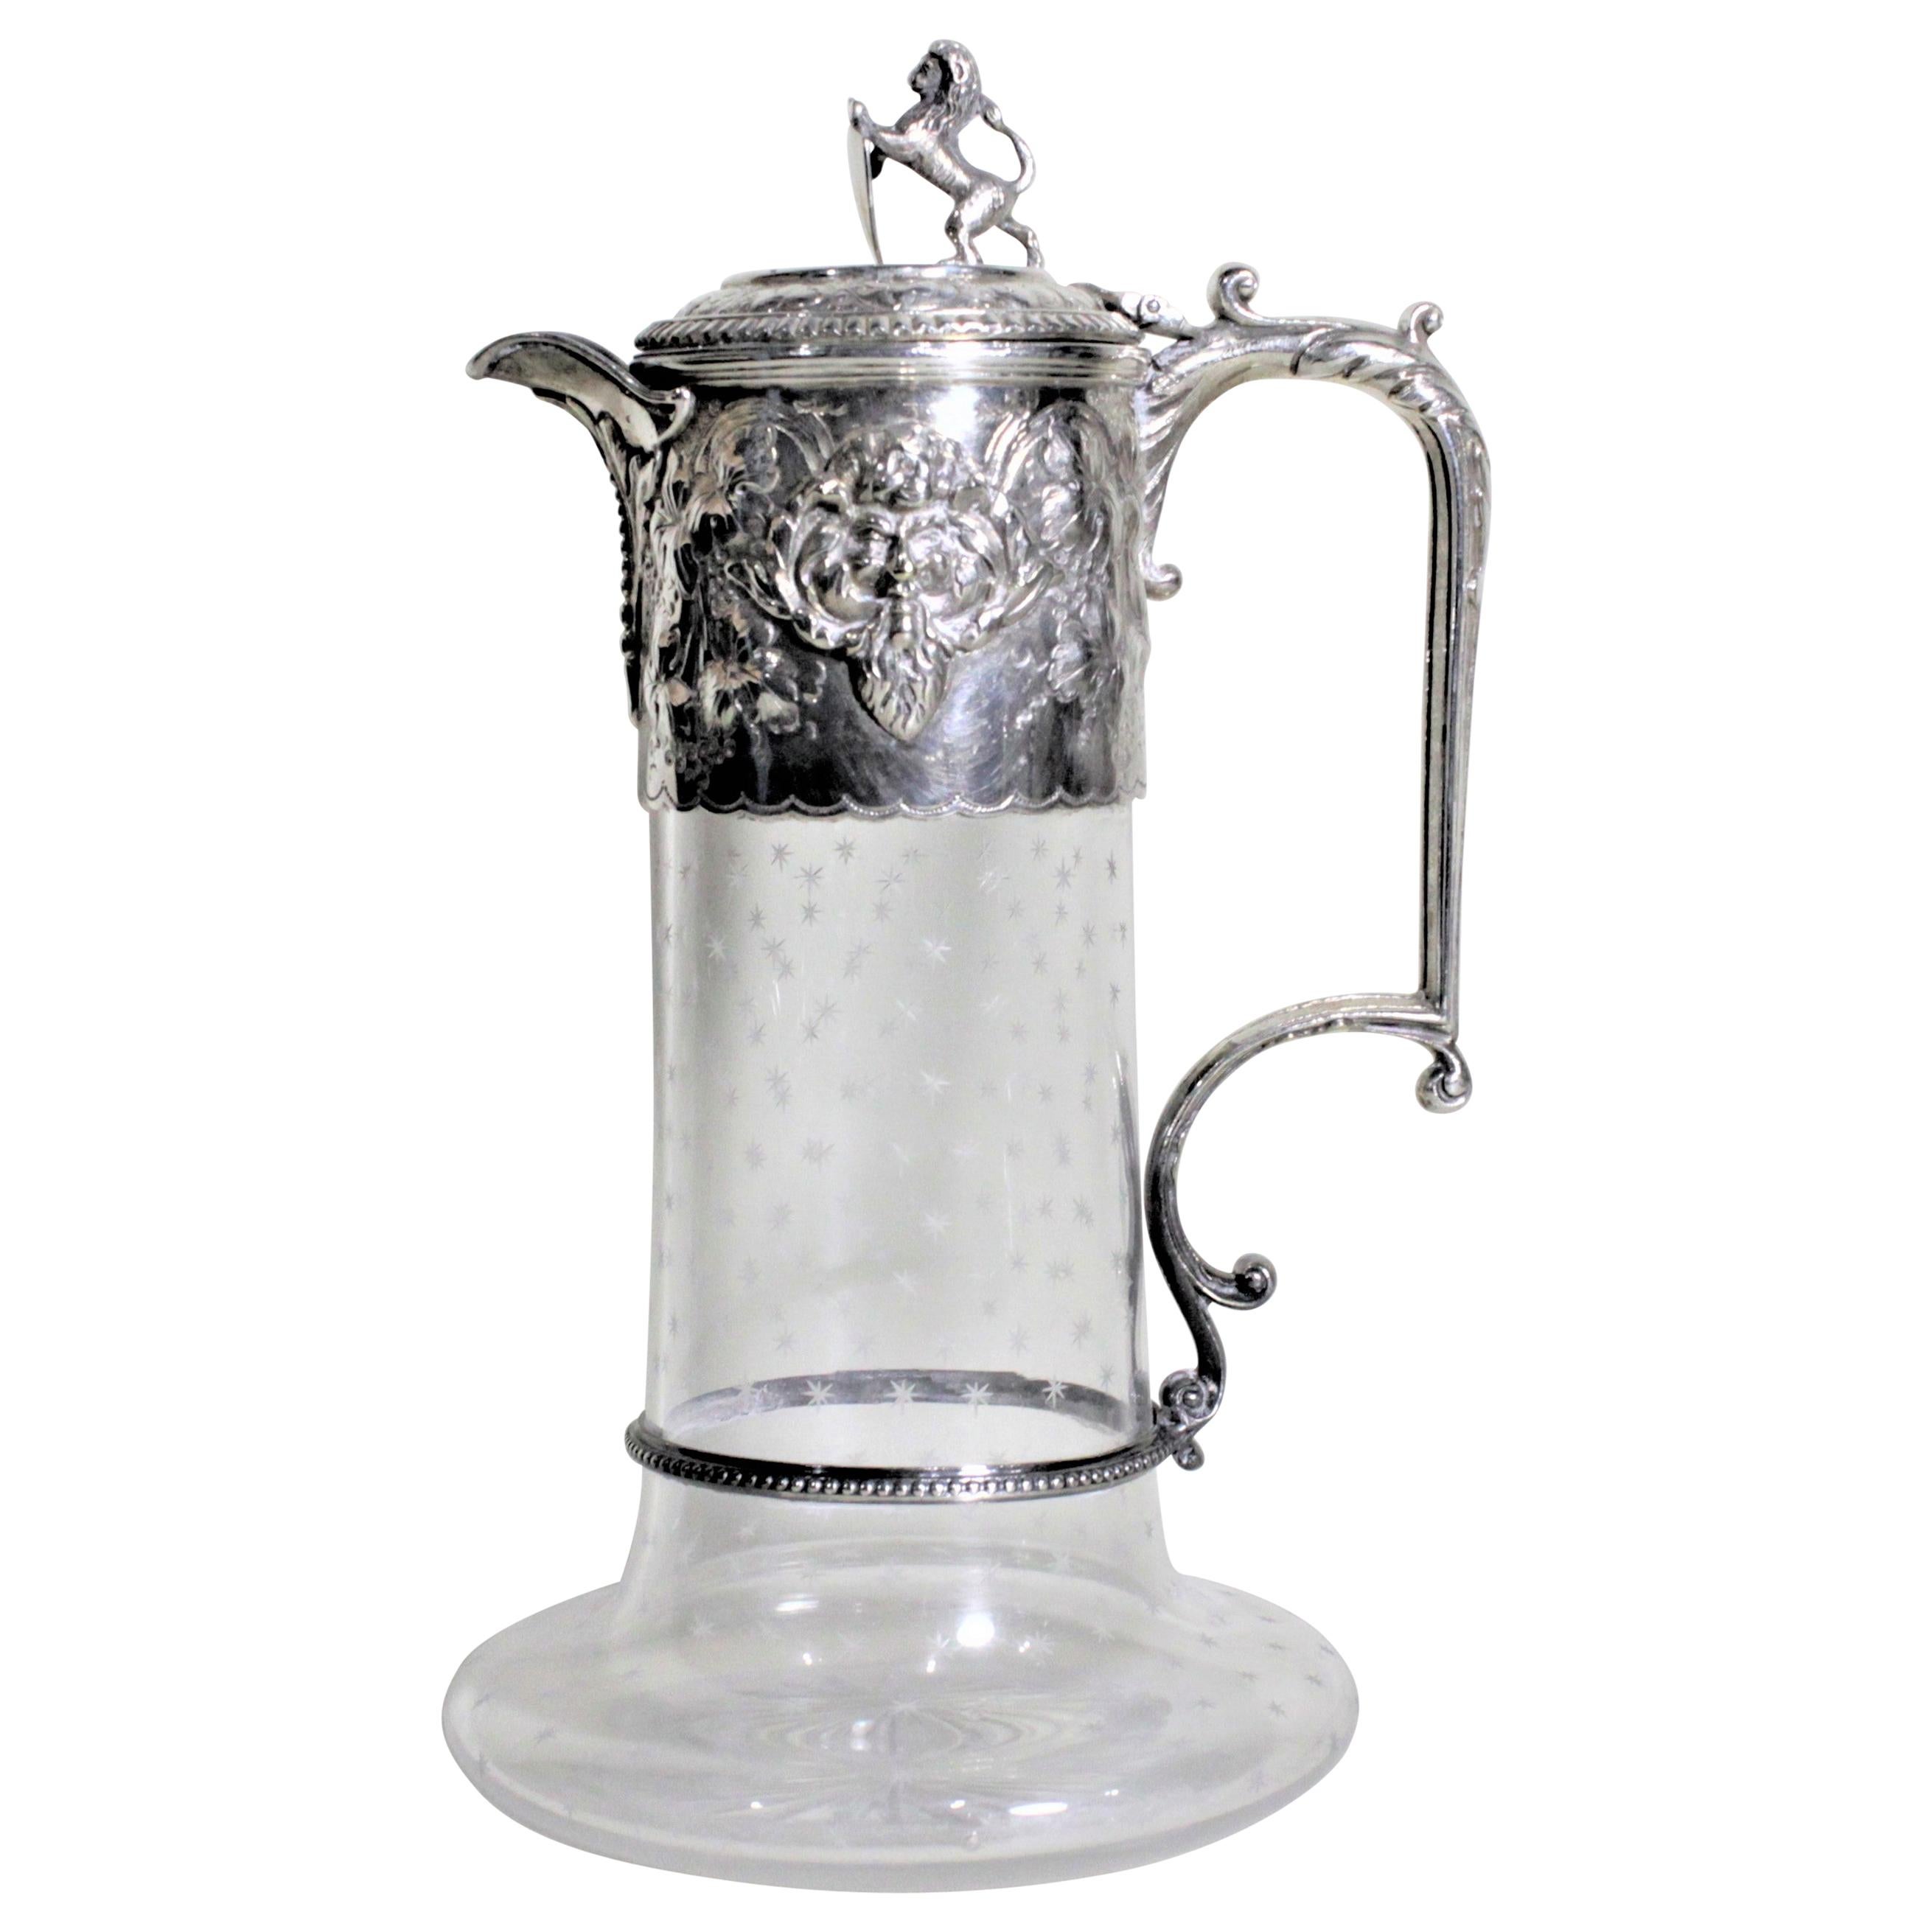 Antique English Silver Plated and Cut Glass Claret Jug or Decanter For Sale